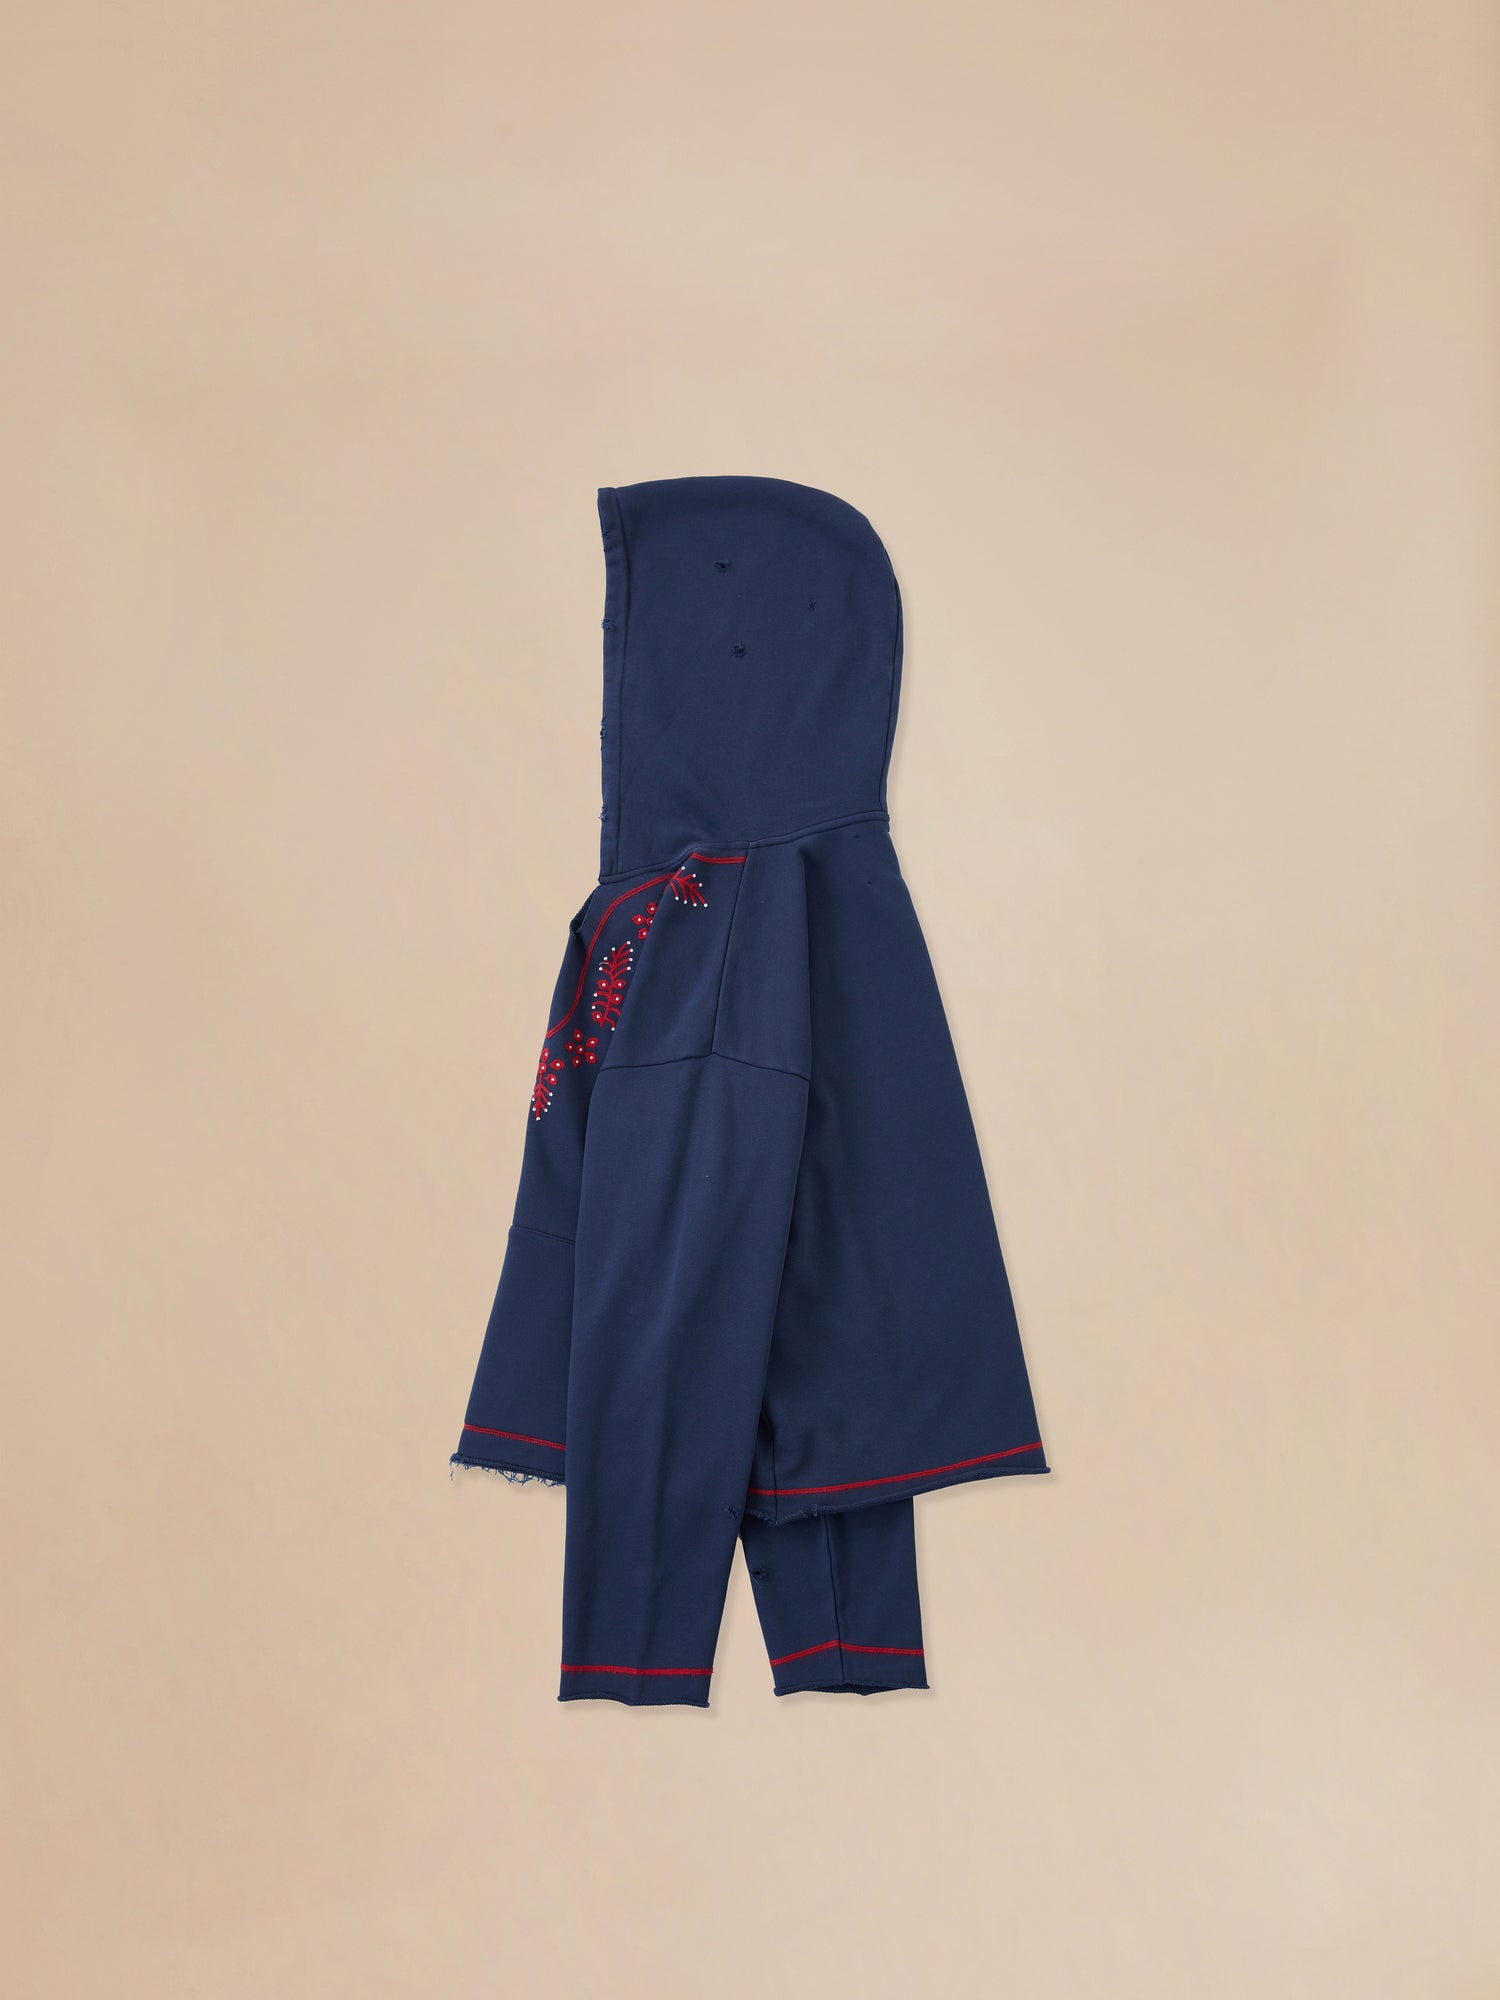 A child's Indus Embroidered Hoodie in navy with red trim by Found.